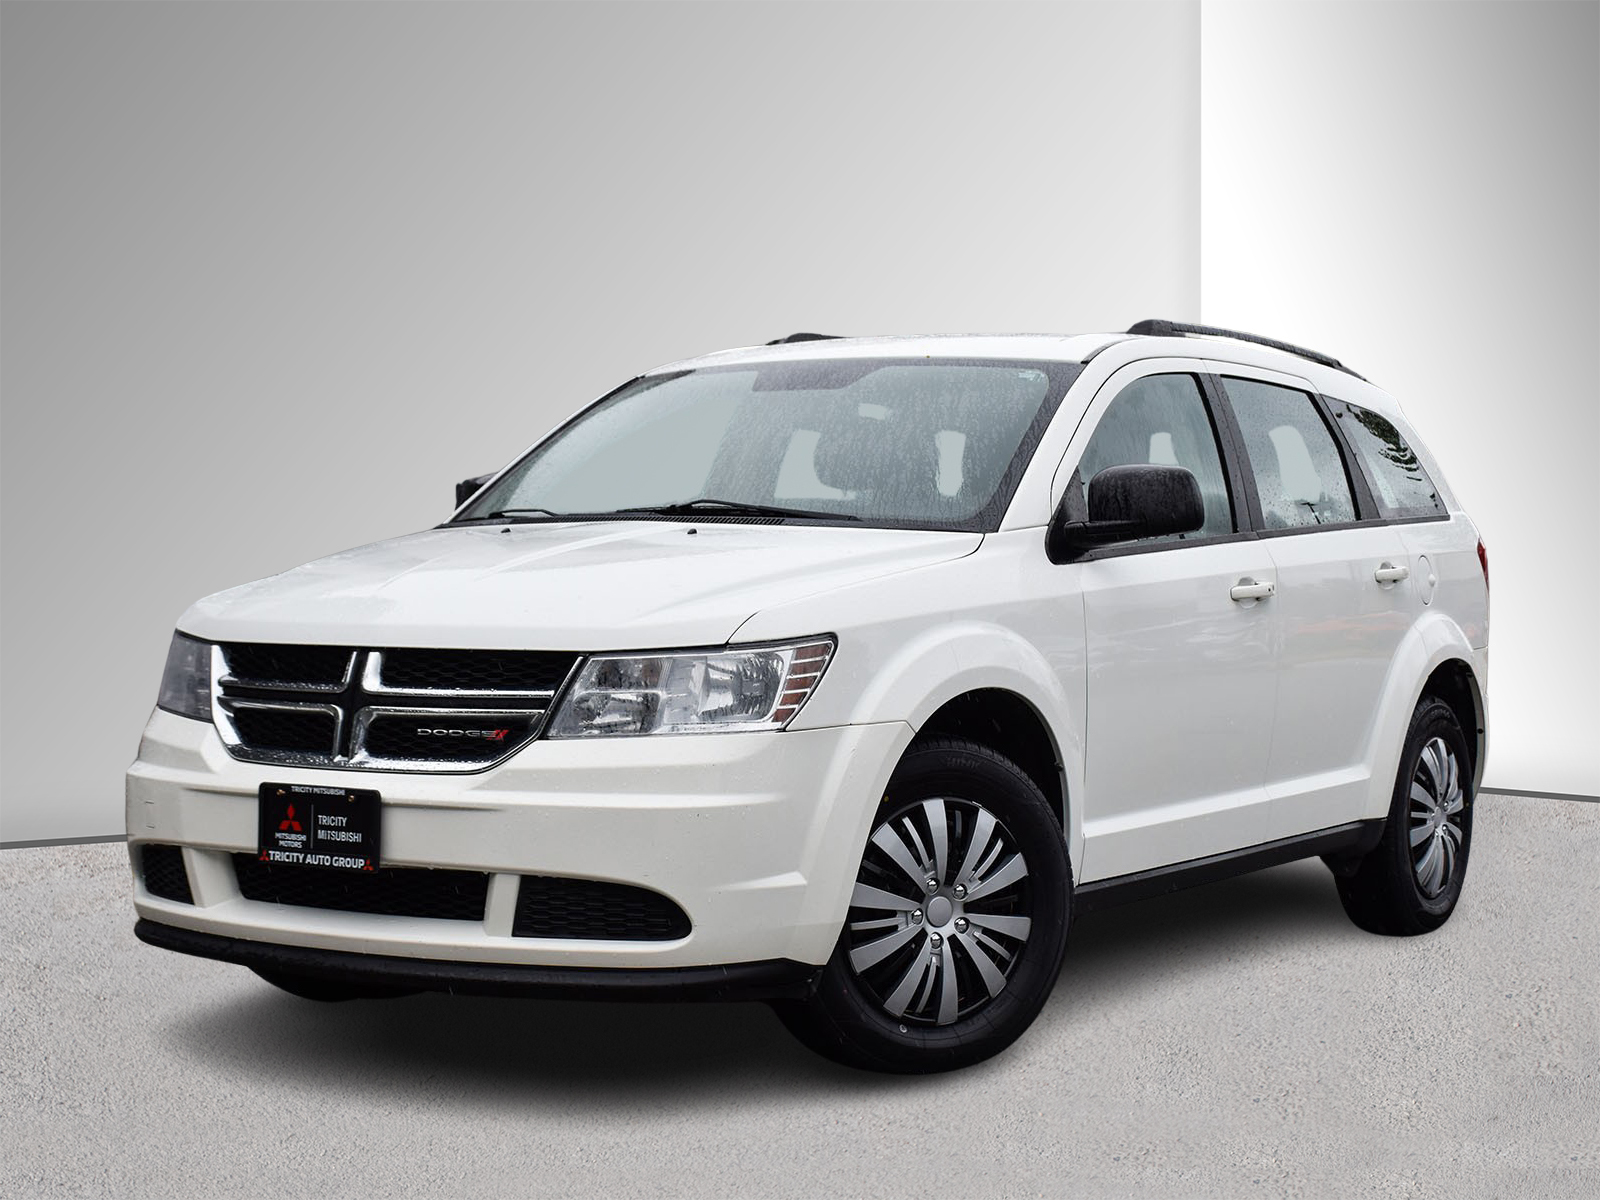 2016 Dodge Journey Canada Value Package - BlueTooth, Cruise Control